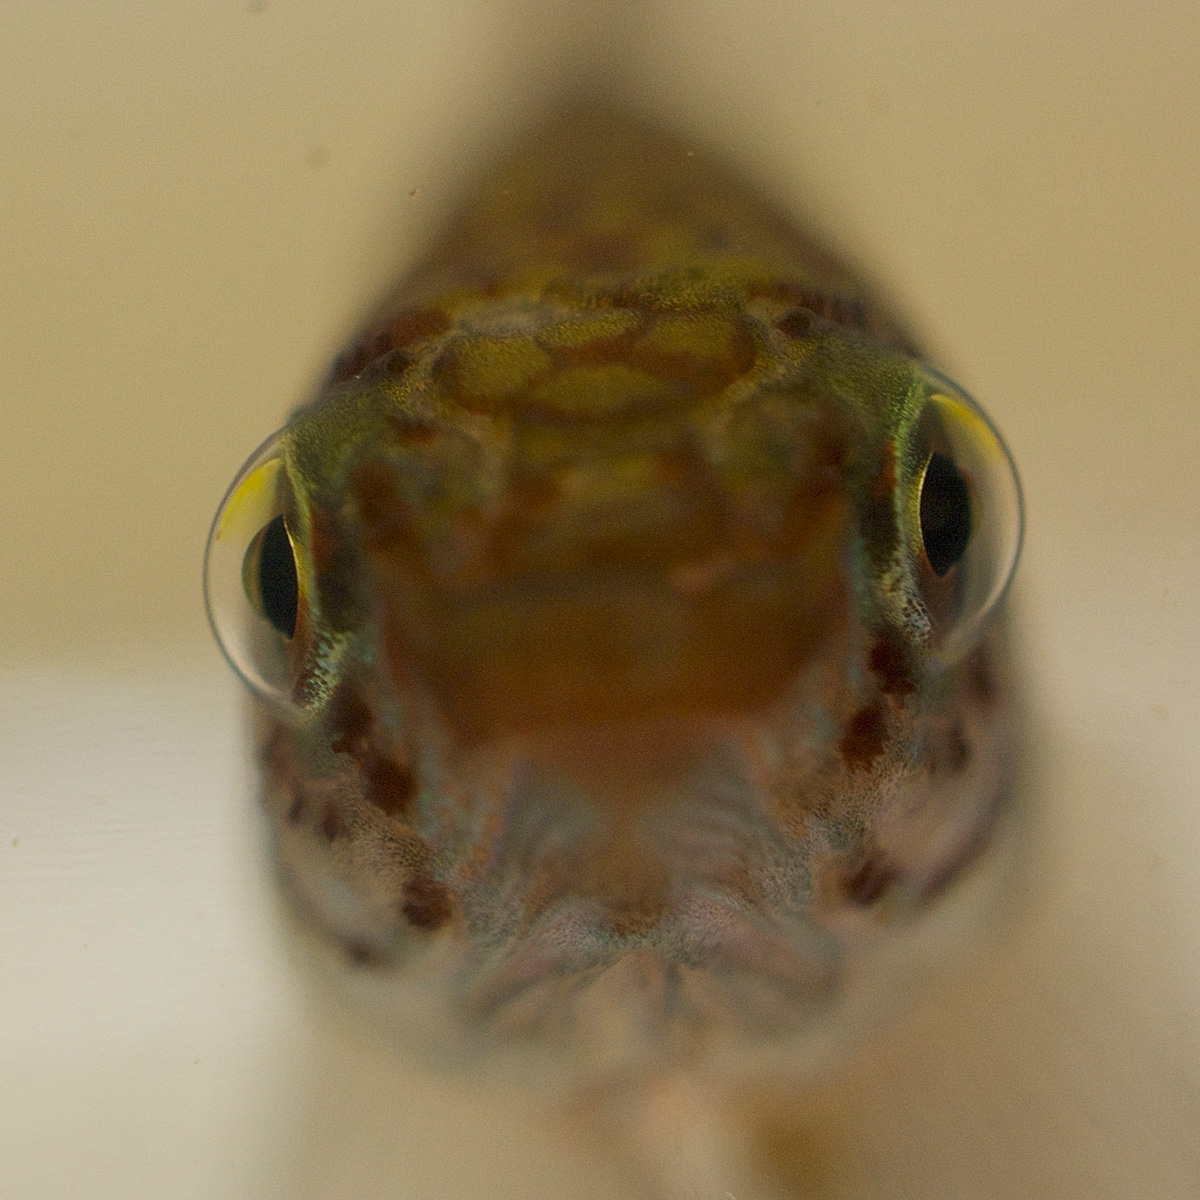 A close-up photo shows a Rio pearlfish head on, its two large eyes looking directly into the camera